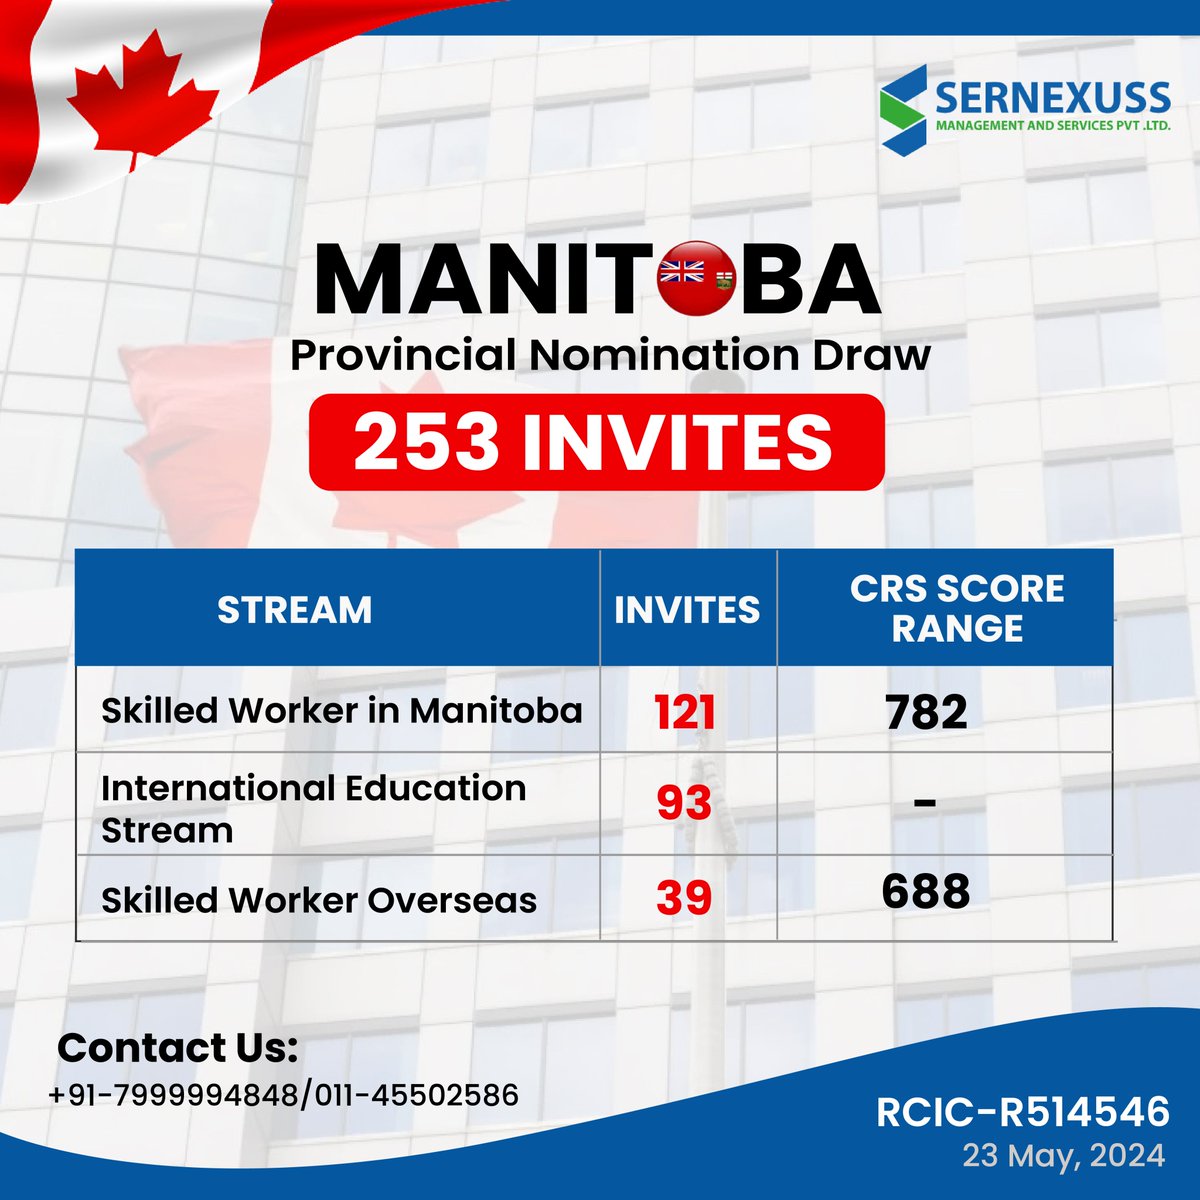 The latest Manitoba PNP Draw issued 253 permanent residency invitations under various categories with different CRS scores. Read more:- bit.ly/4dVZ5e8 #manitoba #pnp #manitobapnp #pnpprogram #sernexuss #sernexussimmigration